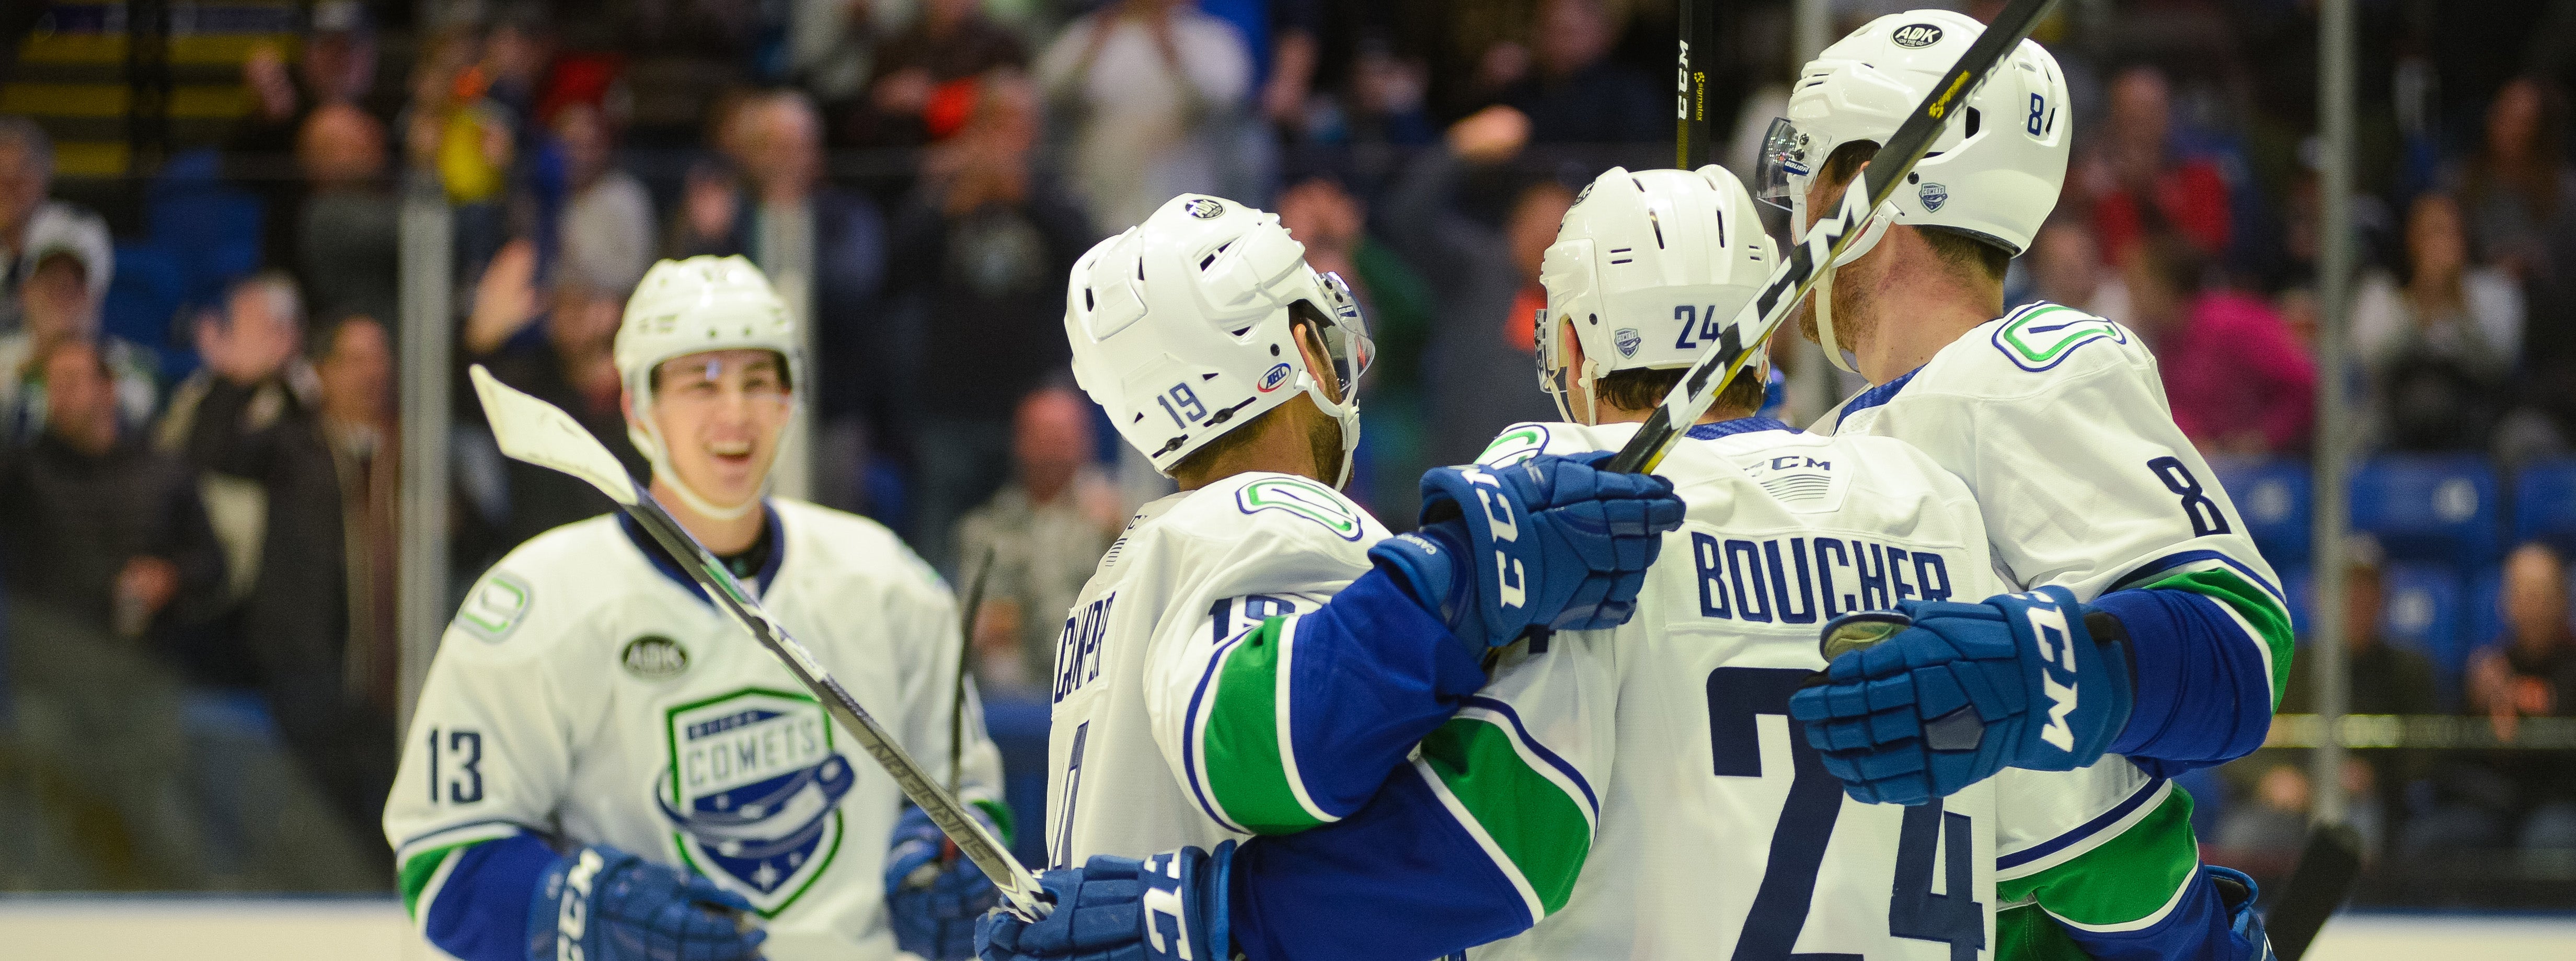 COMETS DOMINATE AMERICANS FOR FIFTH STRAIGHT WIN